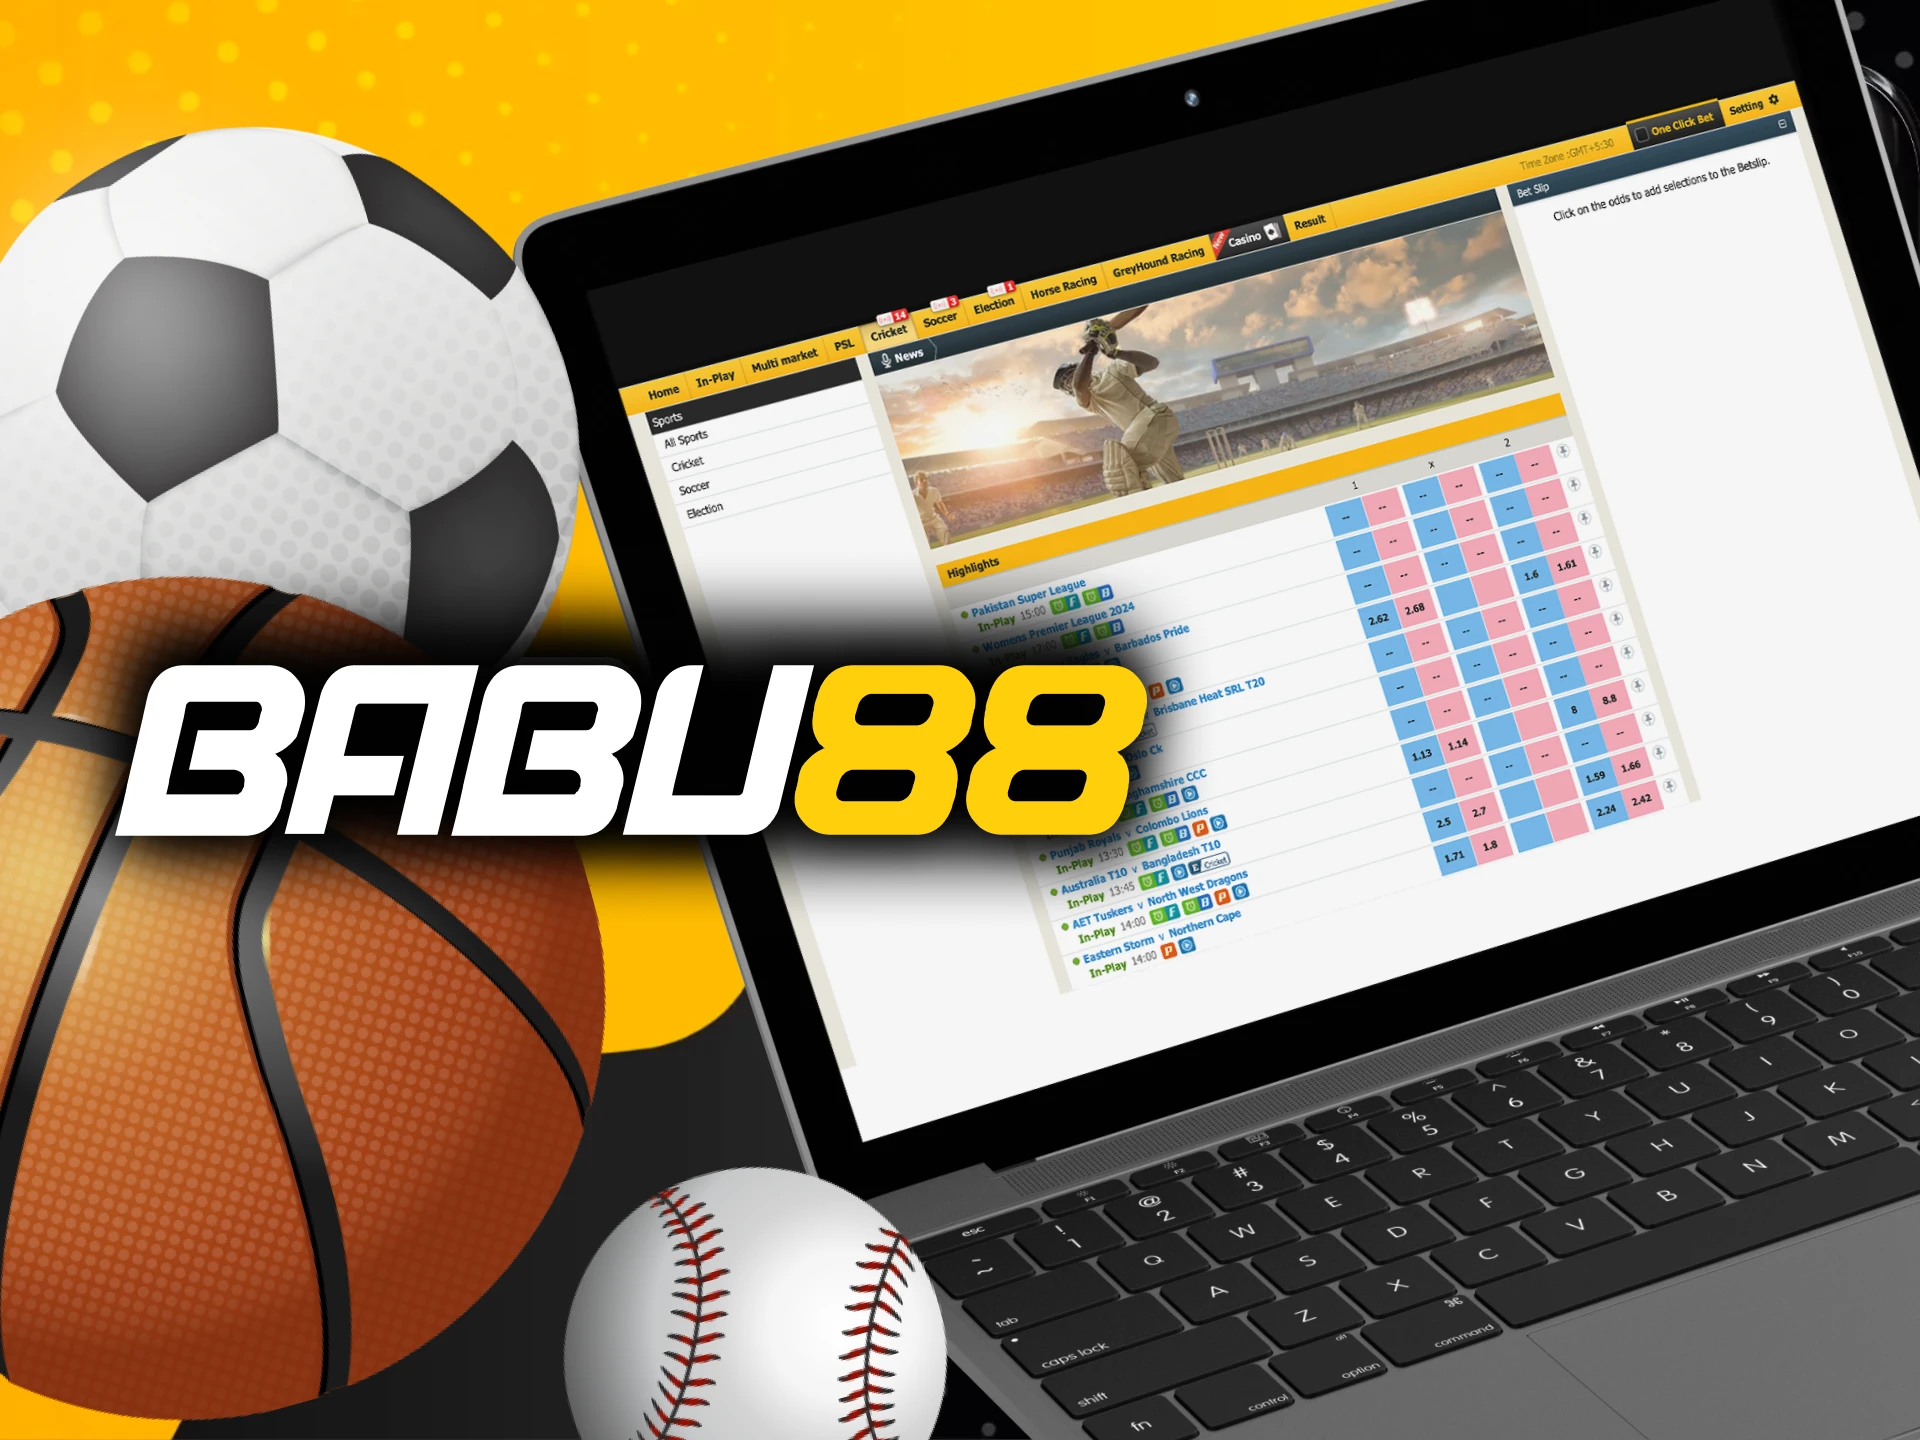 Instructions for players on how to start betting on IPL on the Babu88 online casino website.